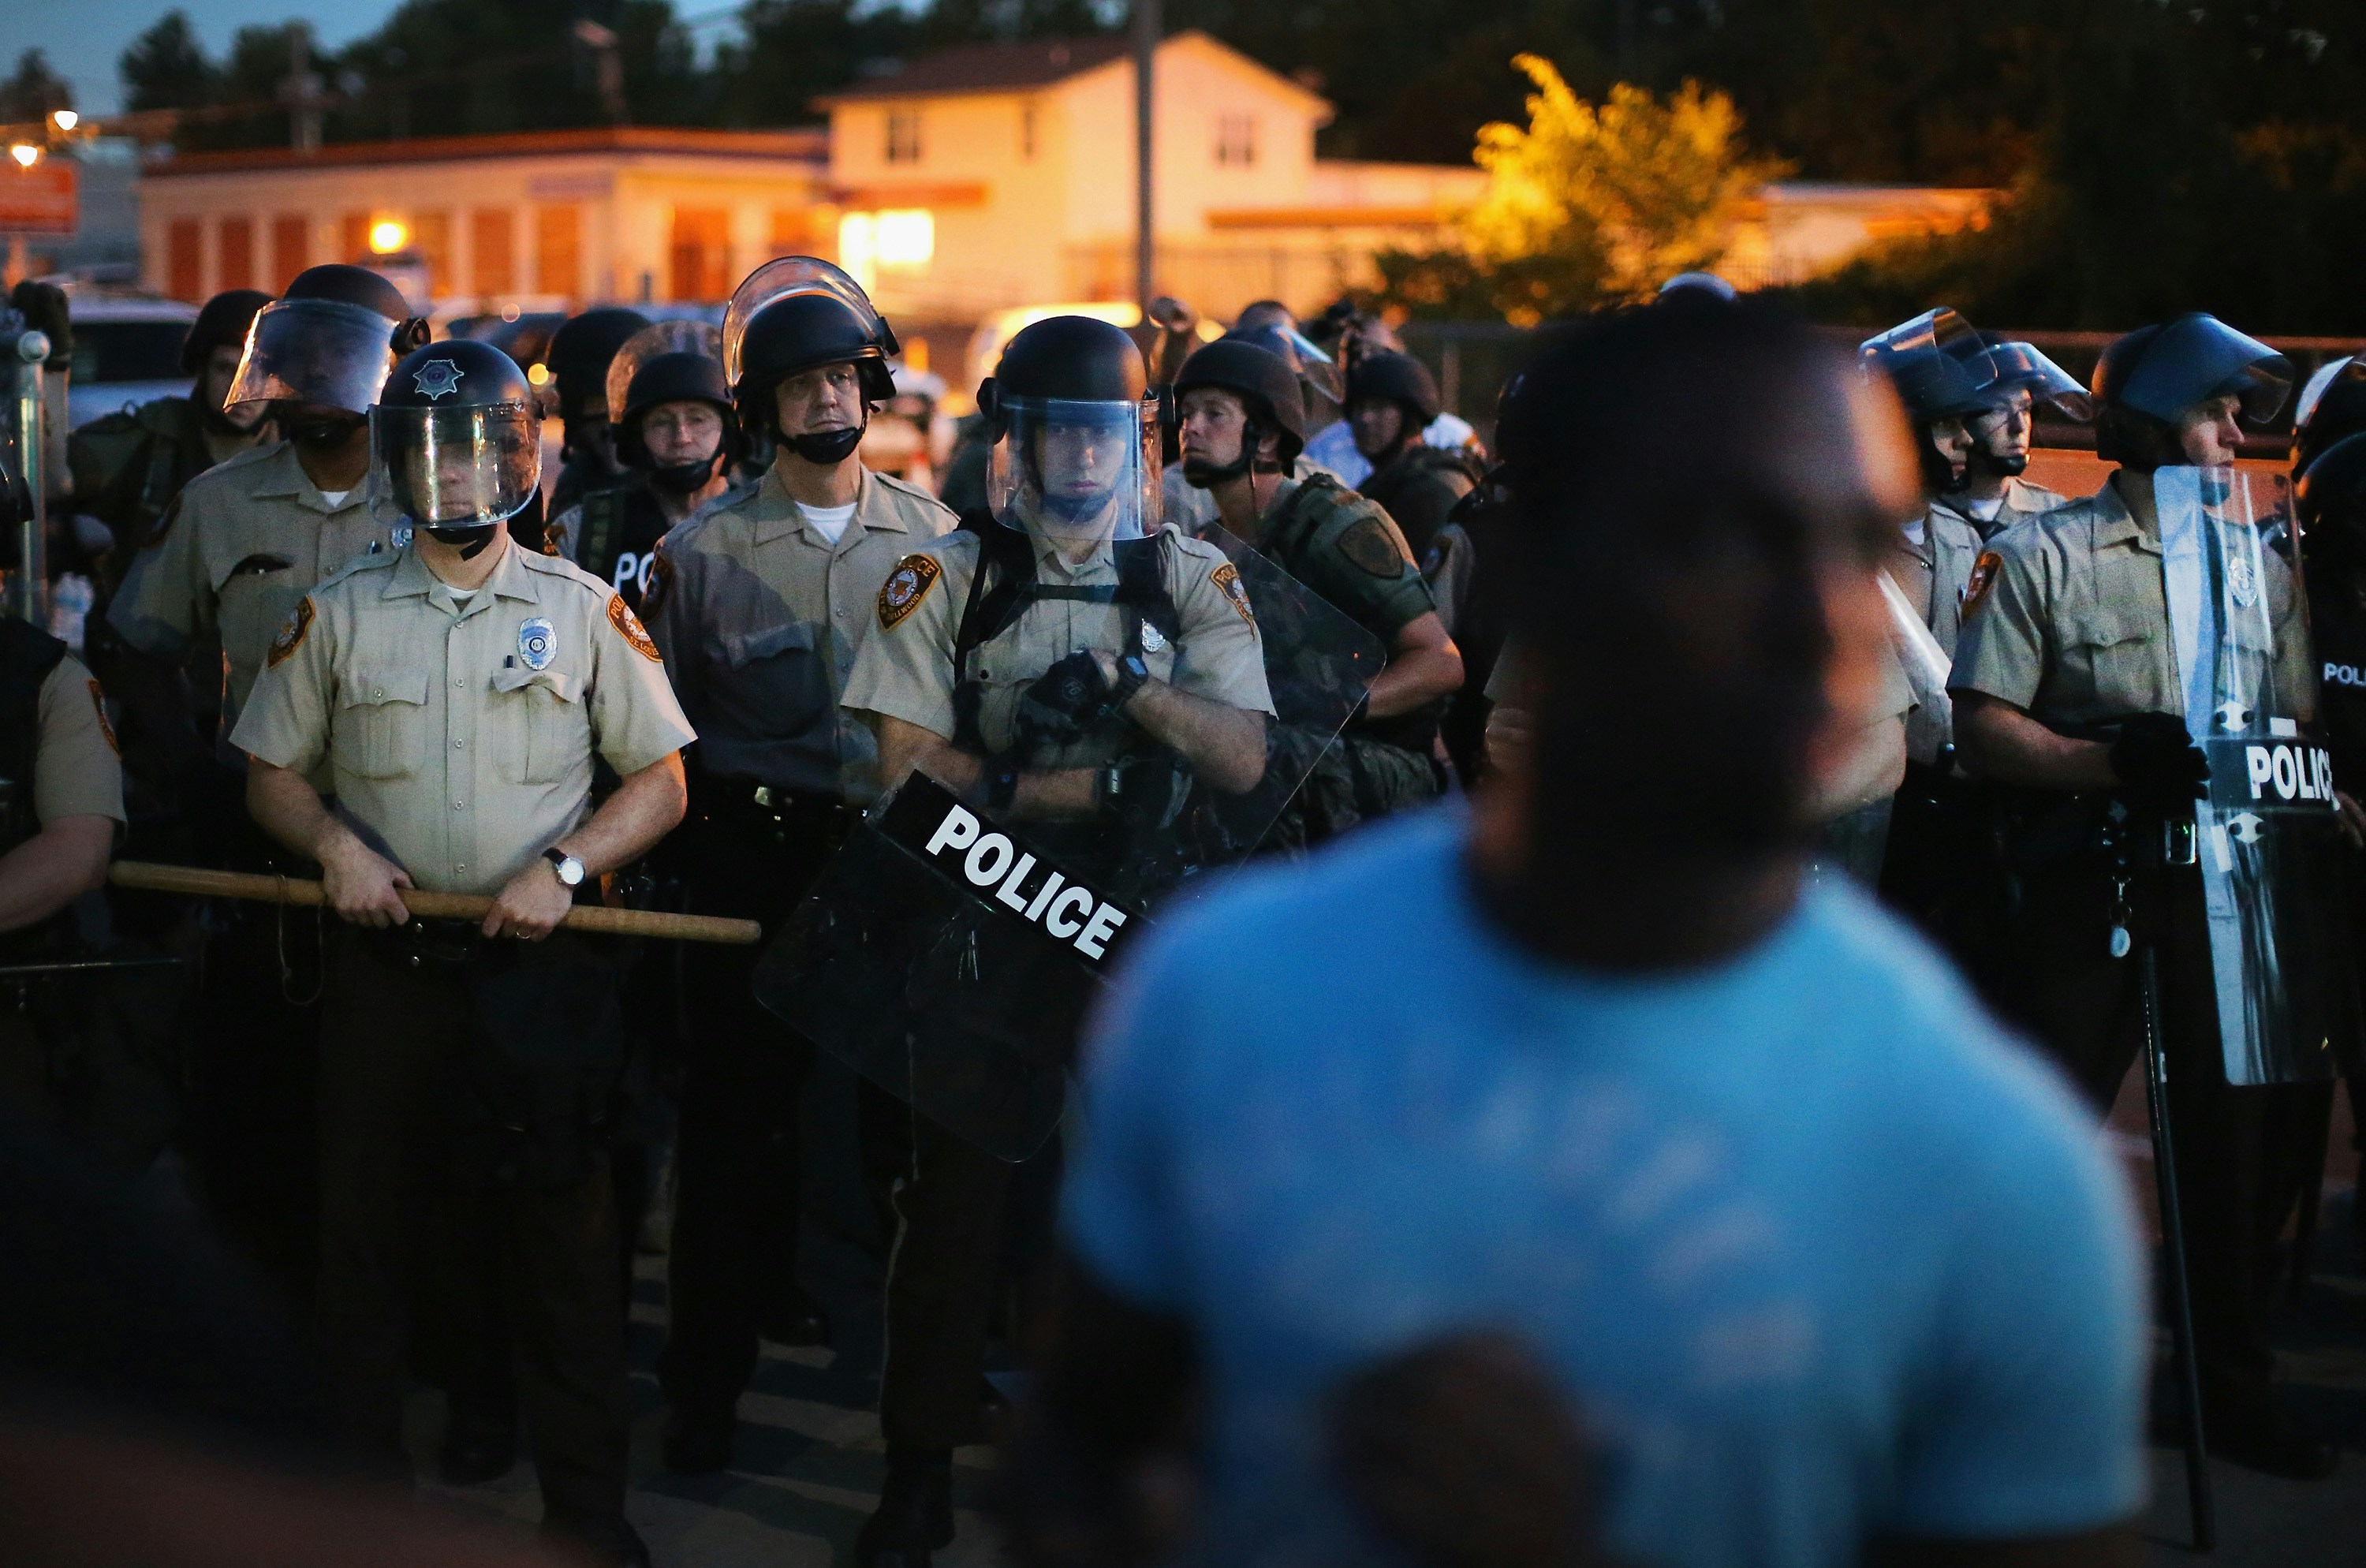 FERGUSON, MO - AUGUST 13:  Police stand watch as demonstrators protest the shooting death of teenager Michael Brown on August 13, 2014 in Ferguson, Missouri. Brown was shot and killed by a Ferguson police officer on Saturday. Ferguson, a St. Louis suburb, is experiencing its fourth day of violent protests since the killing.  (Photo by Scott Olson/Getty Images)